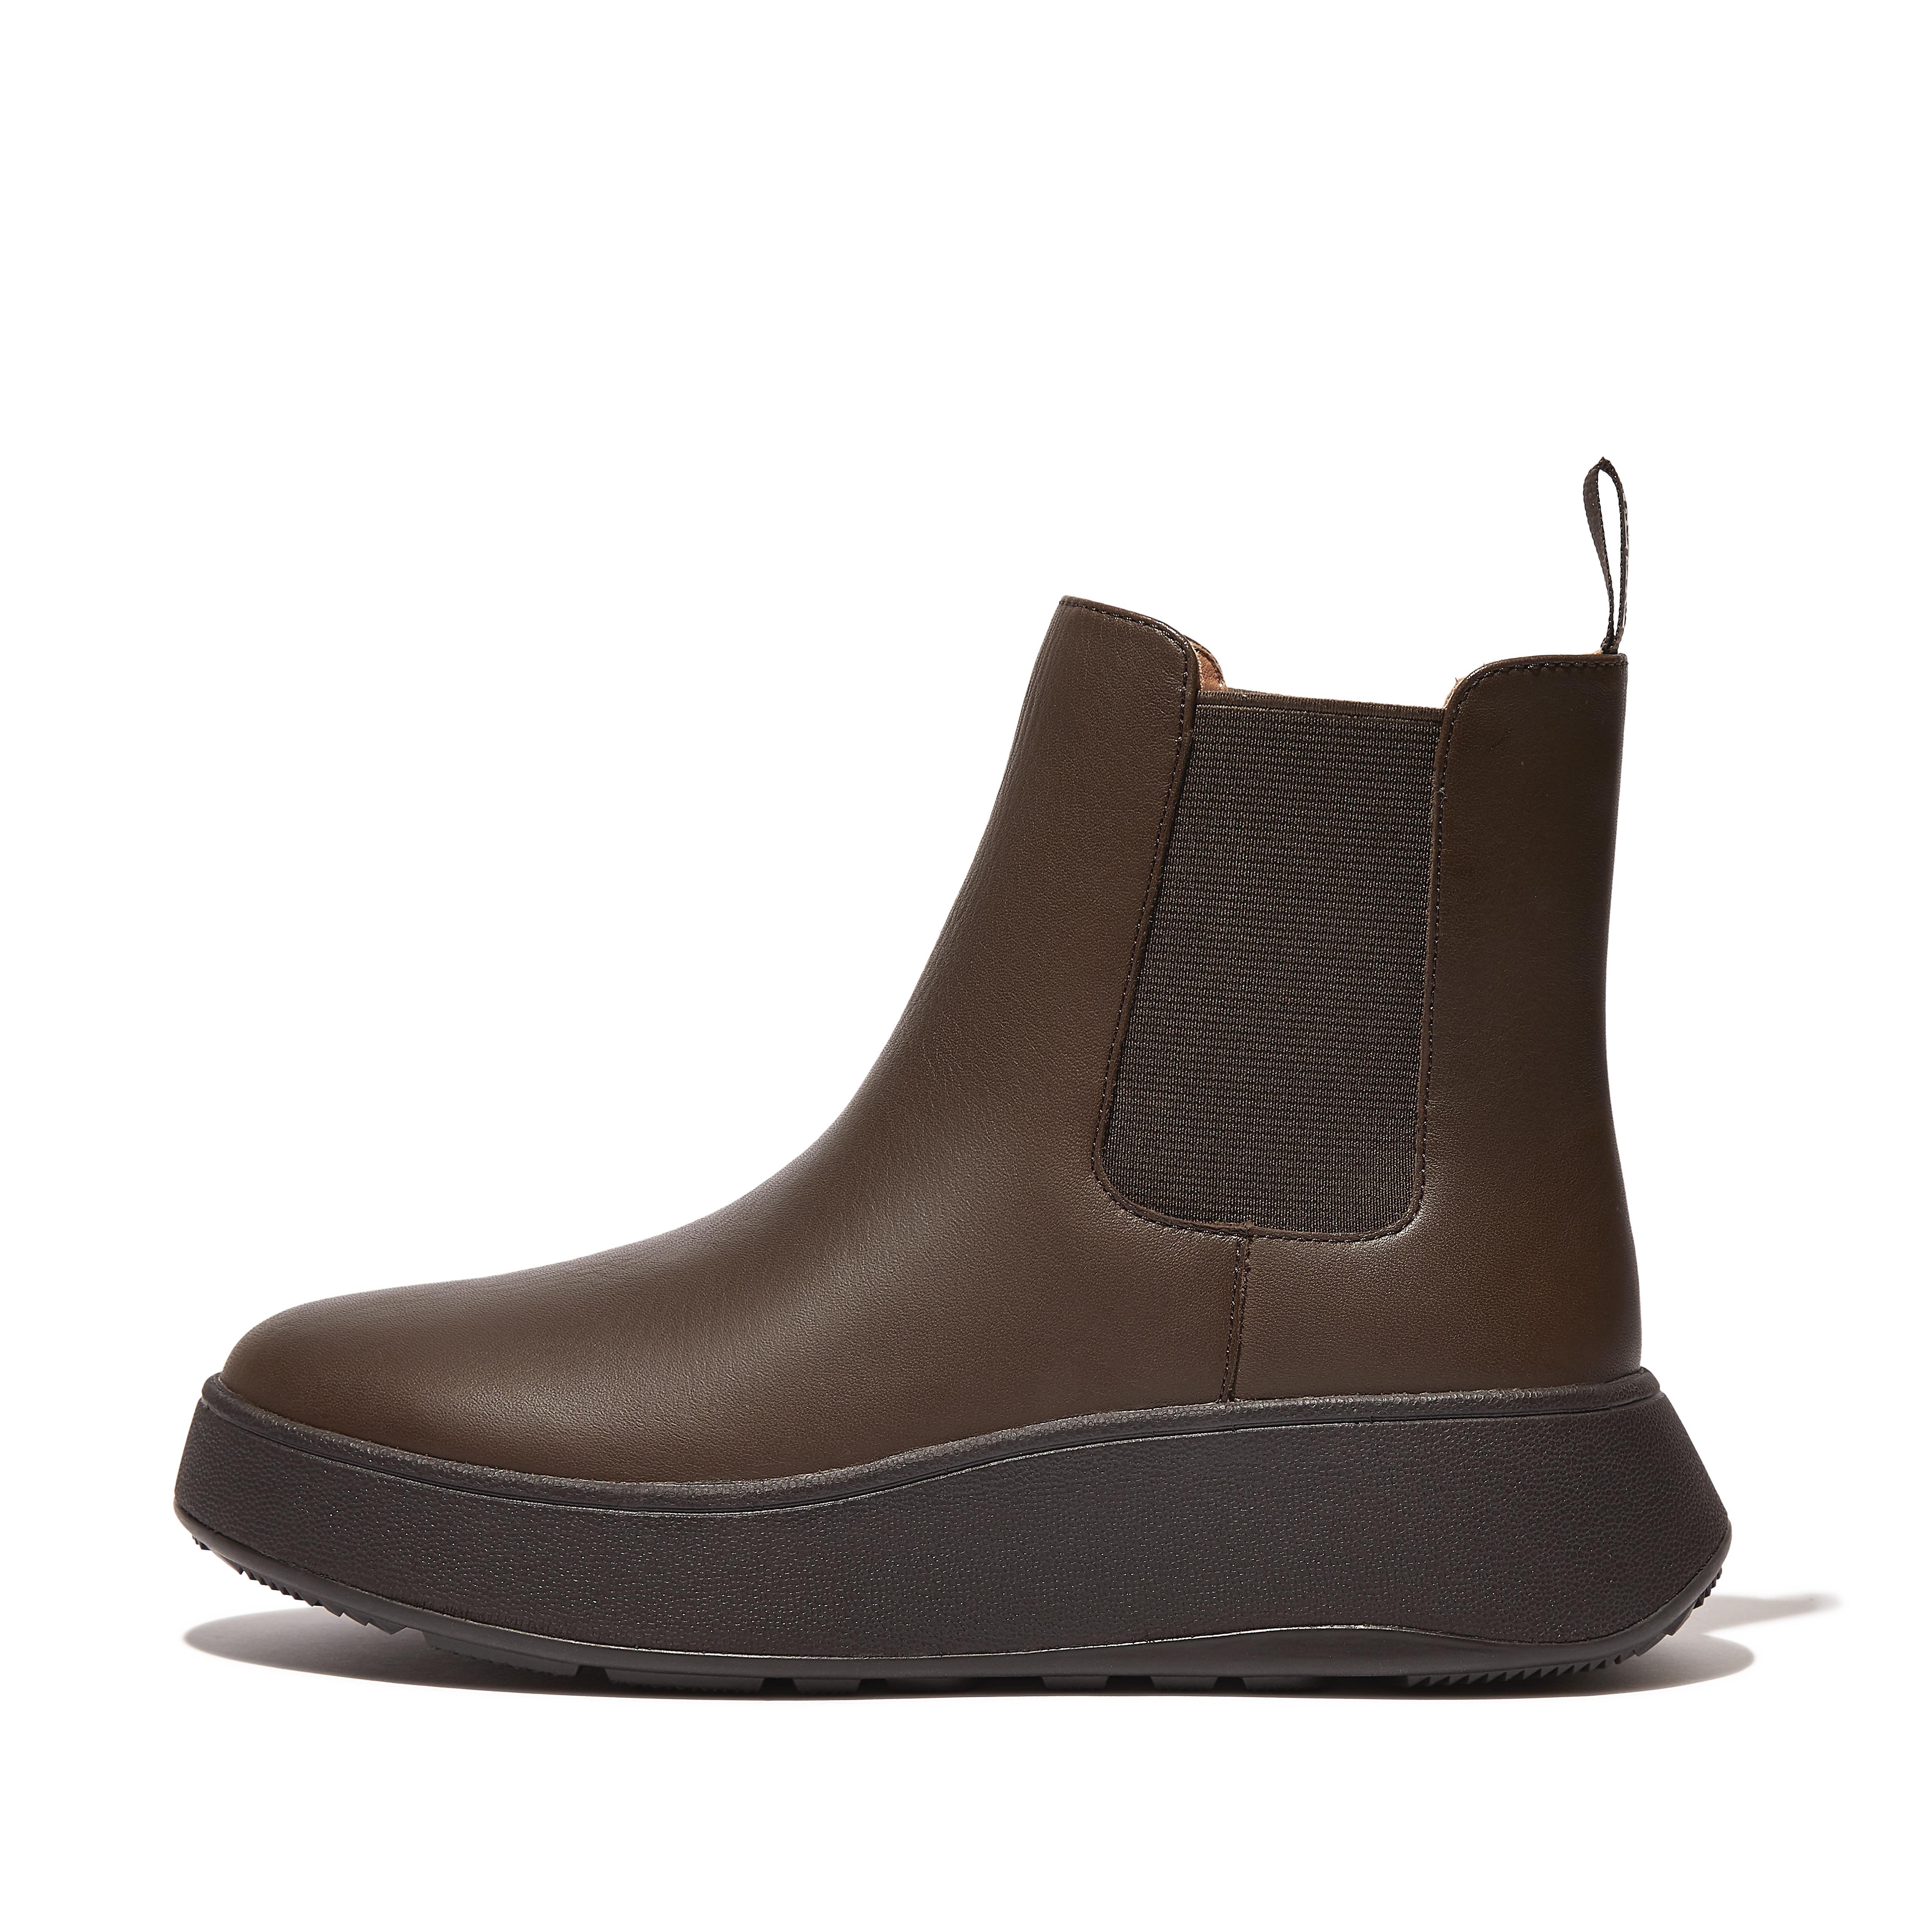 Fitflop Leather Flatform Chelsea Boots,Brown Mix